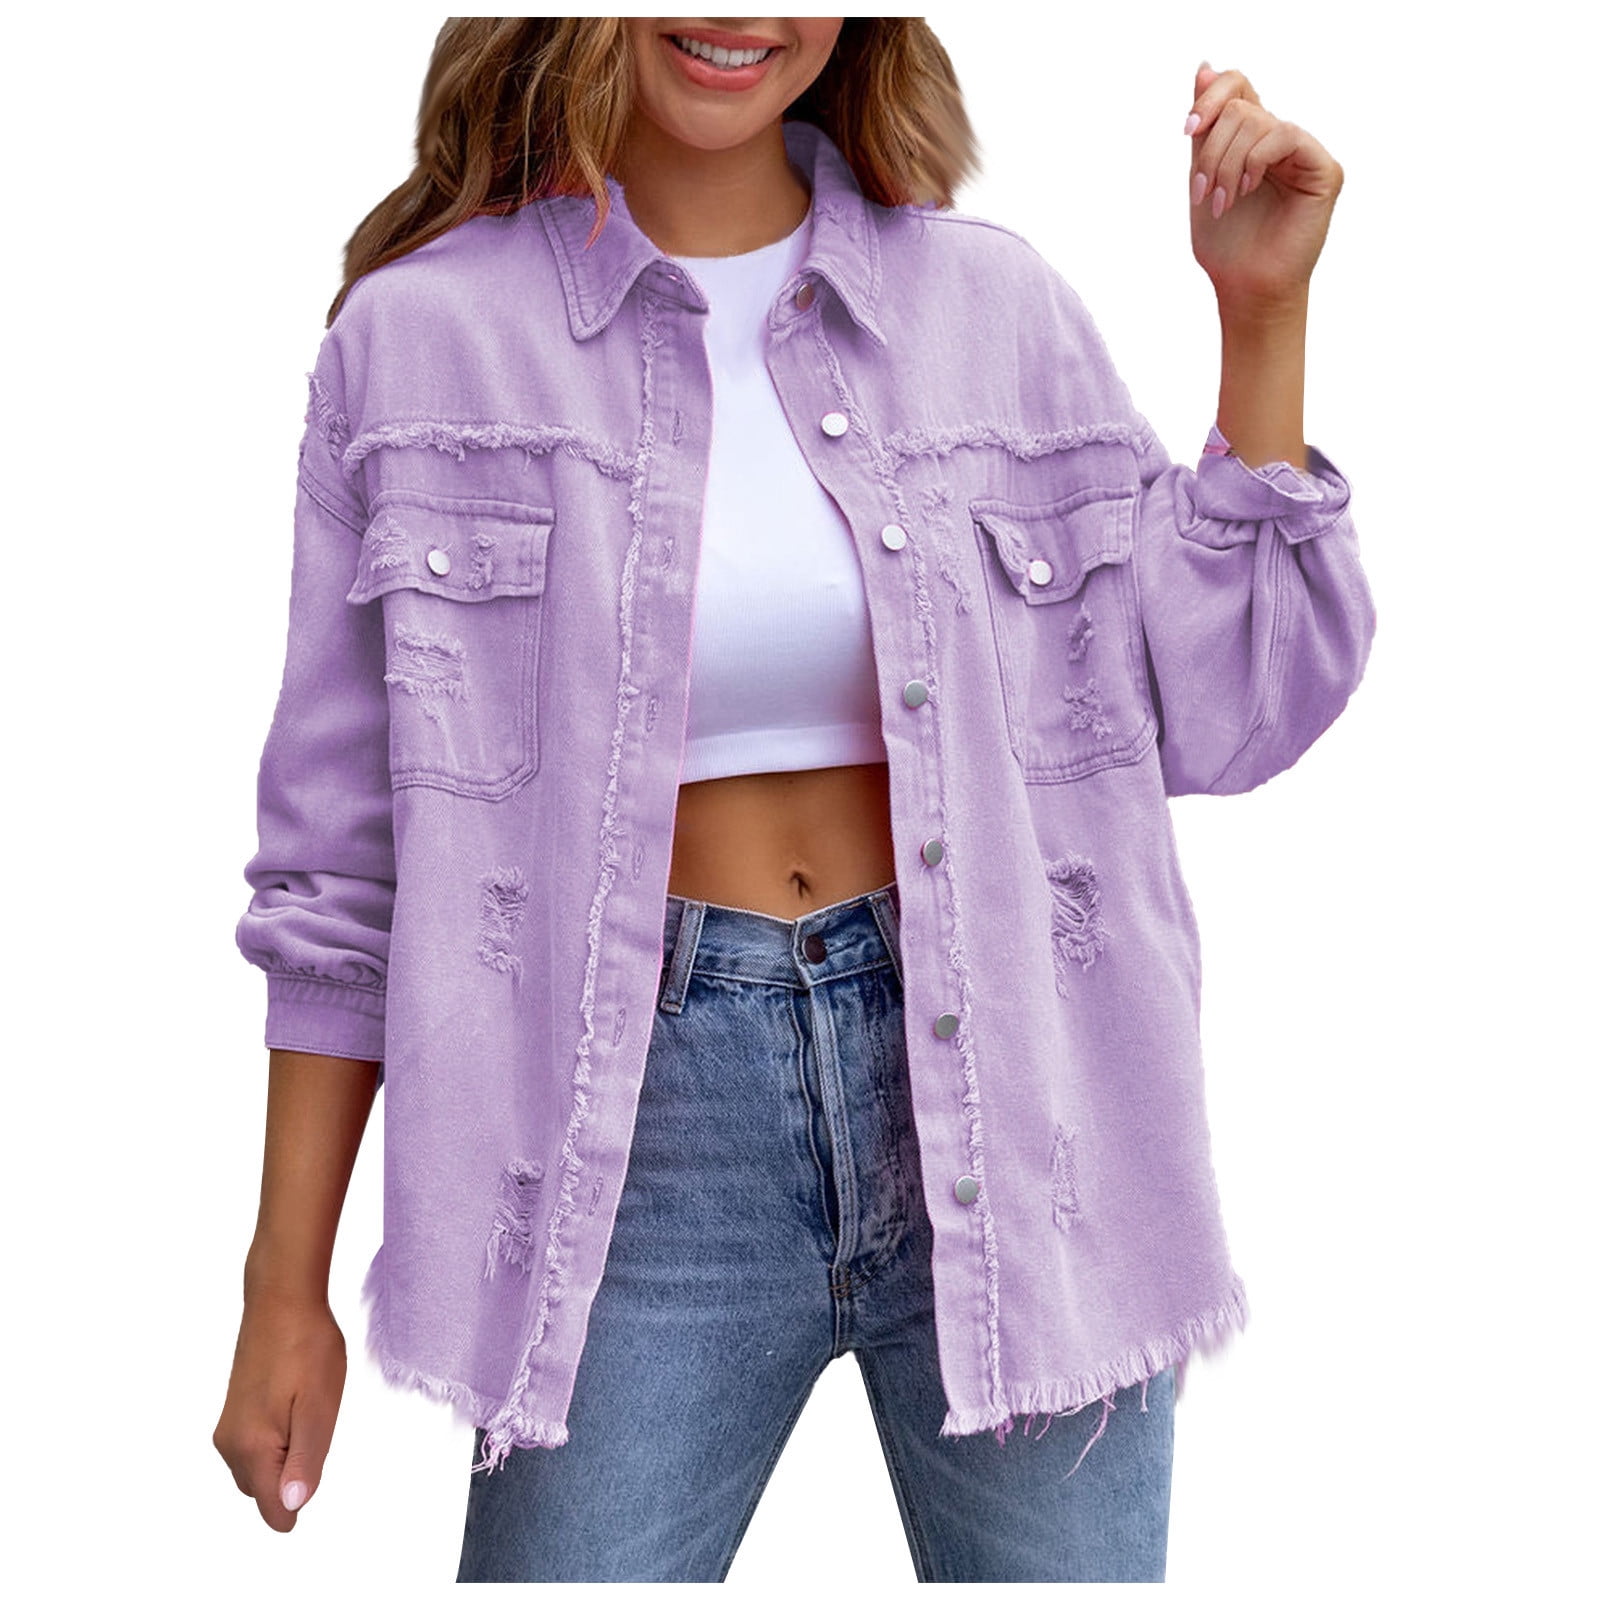 YYDGH Women's Oversized Frayed Lightweight Denim Jacket Button Down Ripped  Distressed Jean Shacket Pink XL 